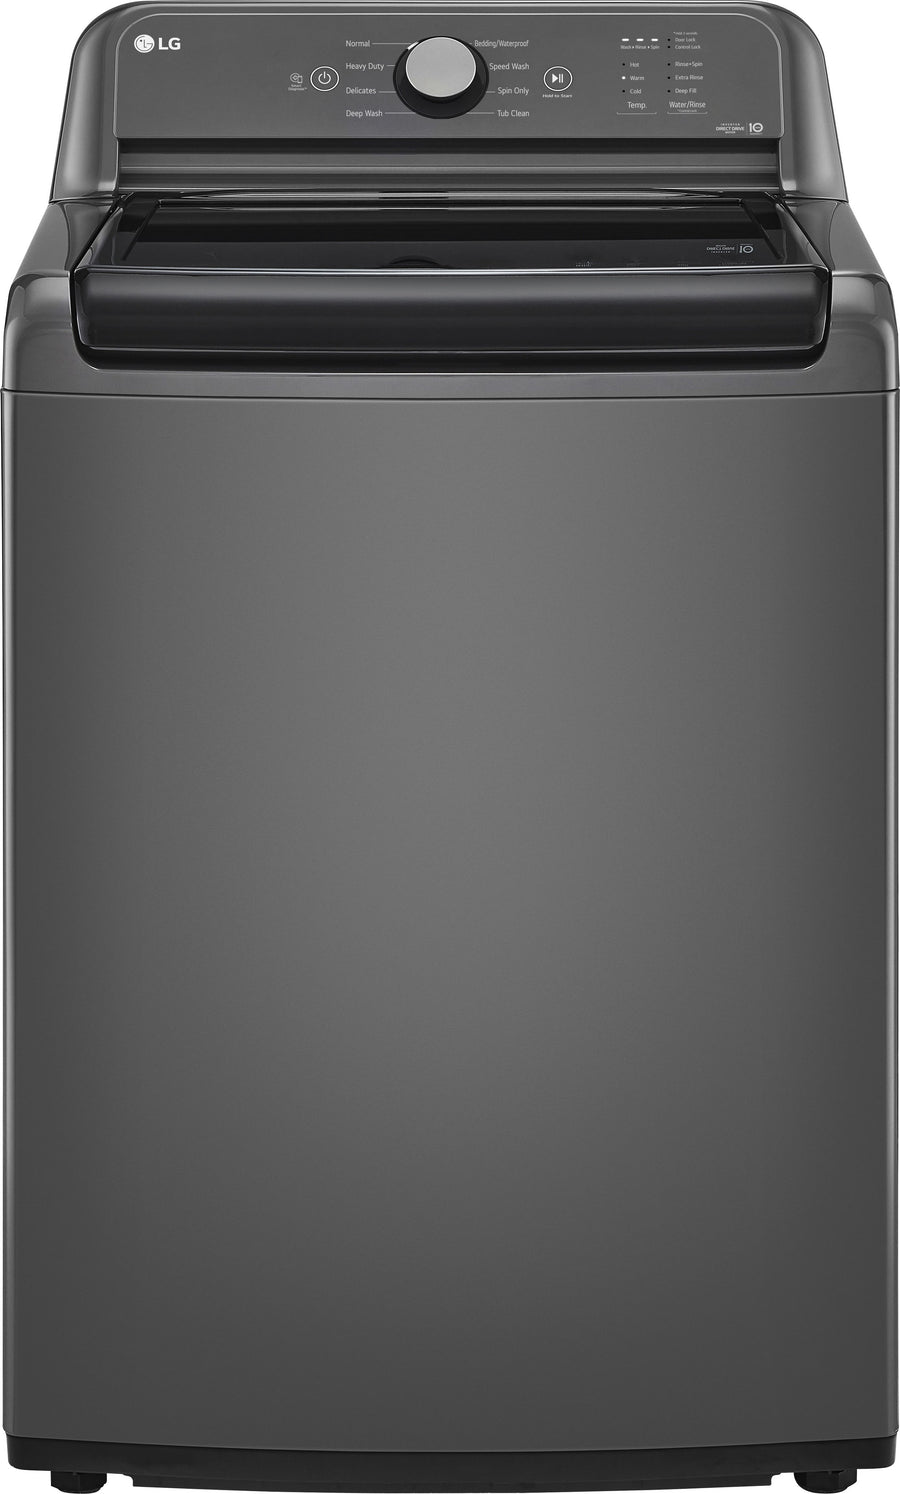 LG - 4.1 Cu. Ft. High-Efficiency Top Load Washer with TurboDrum Technology - Monochrome Grey_0